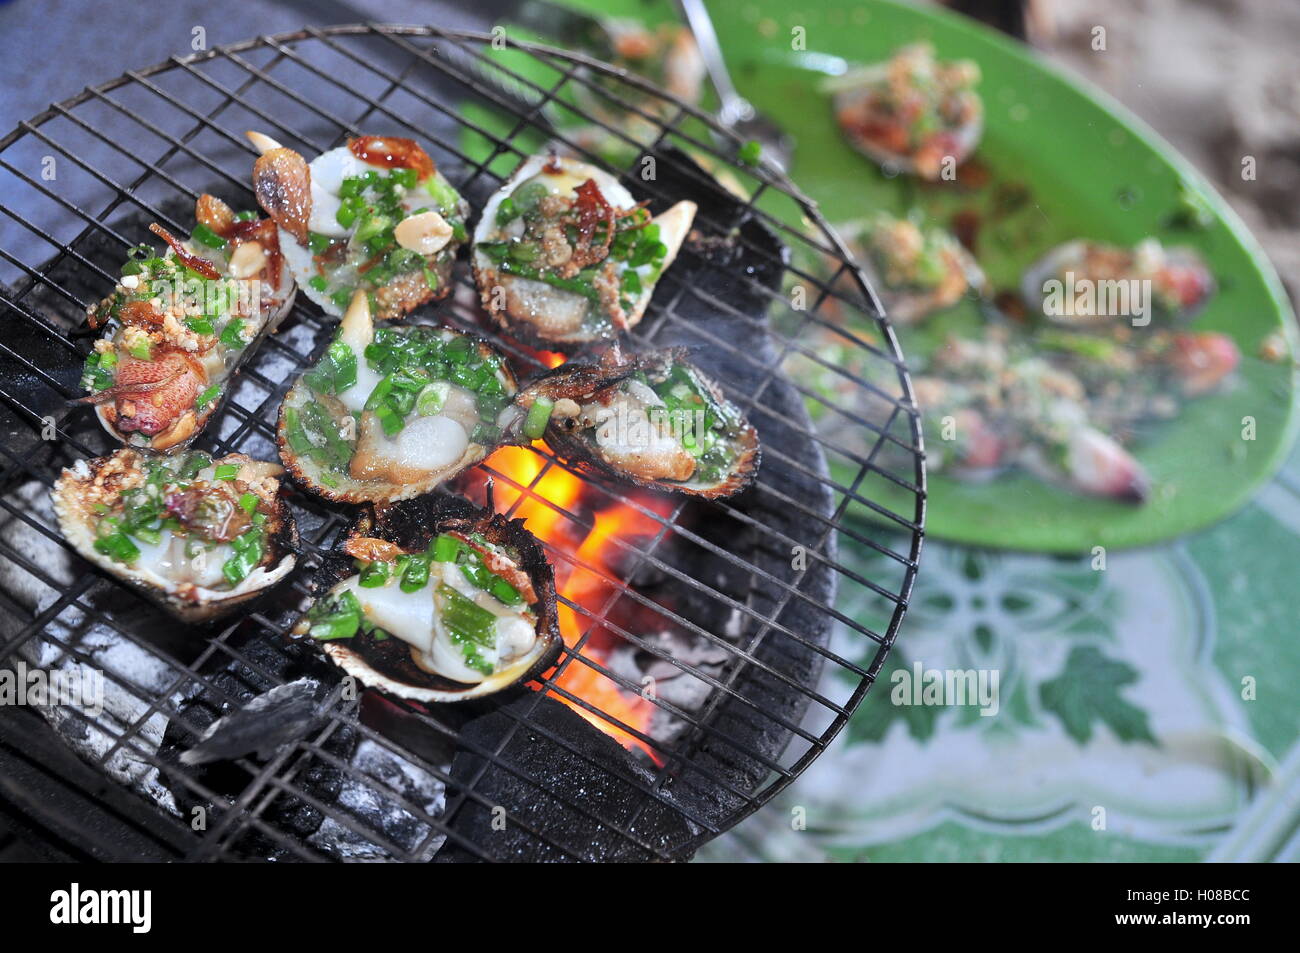 Grilling shellfish and seafood on hot fire Stock Photo